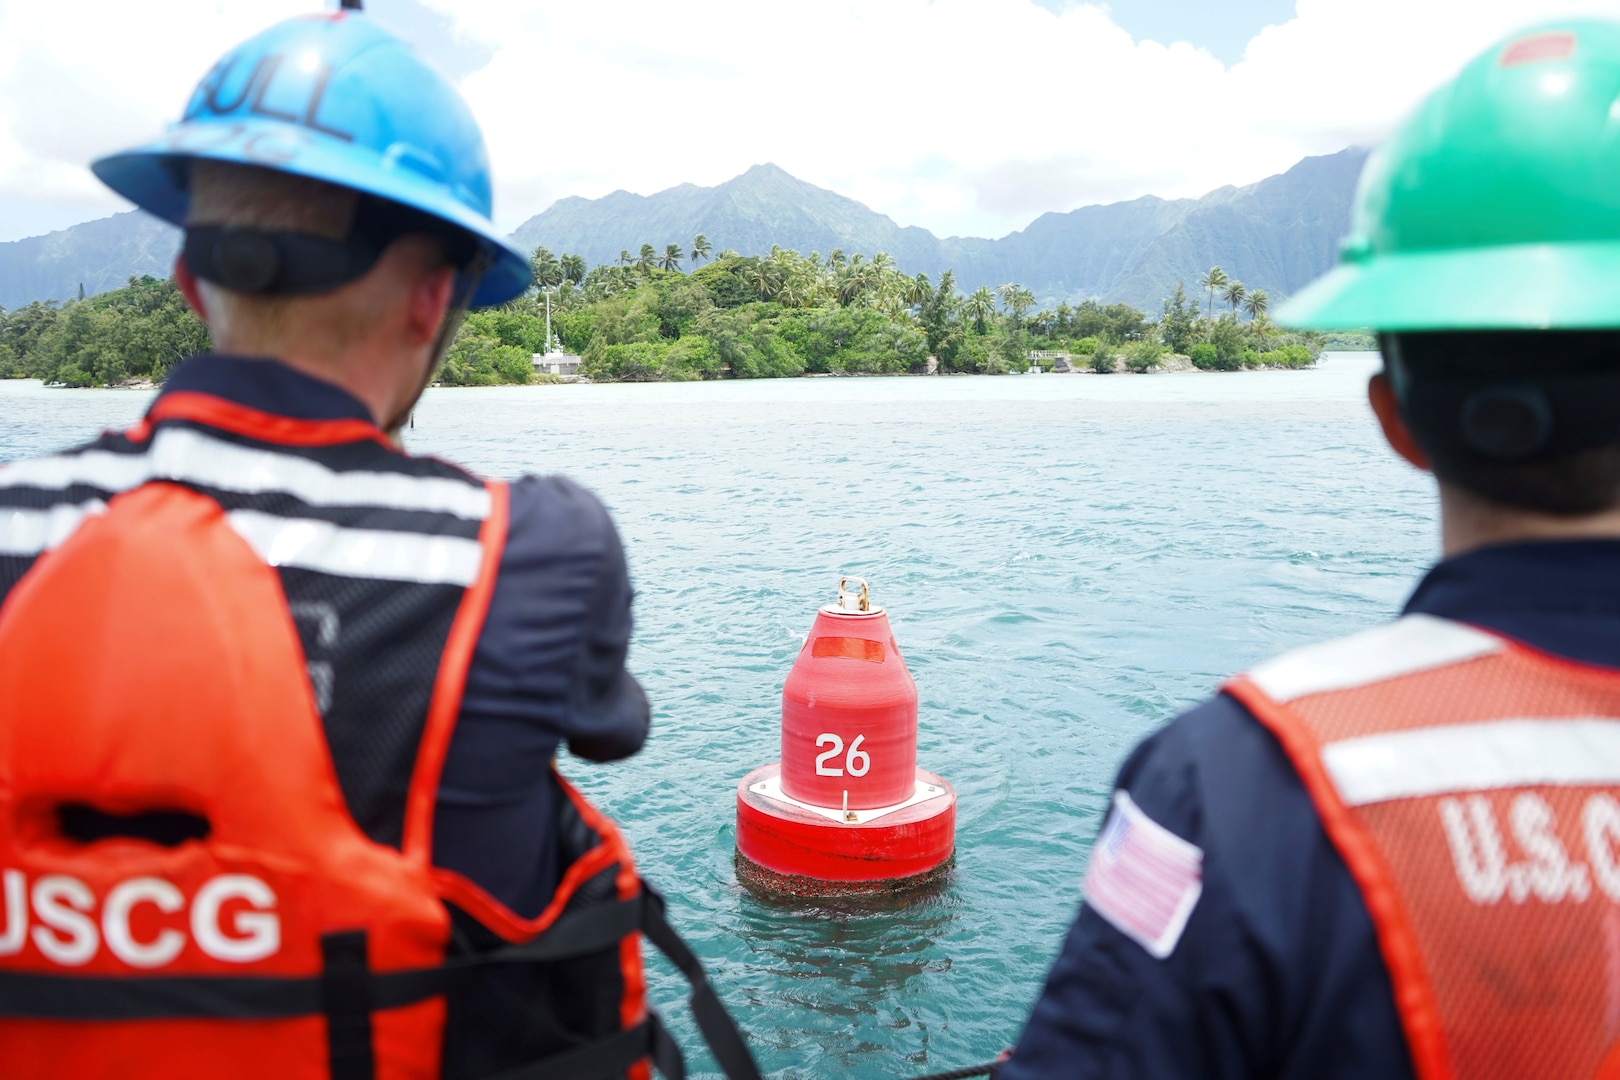 The Coast Guard Cutter Juniper crew visited Kaneohe Bay on the east side of the Island of Oahu, as part of a multi-day operation to service and maintain aids to navigation, last week.
Juniper’s trip to Kaneohe Bay focused on repairing day boards, or stationary aids to navigation that mark channels and safe water, utilizing the cutter’s two small boats to service seven fixed aids to navigation in two days.